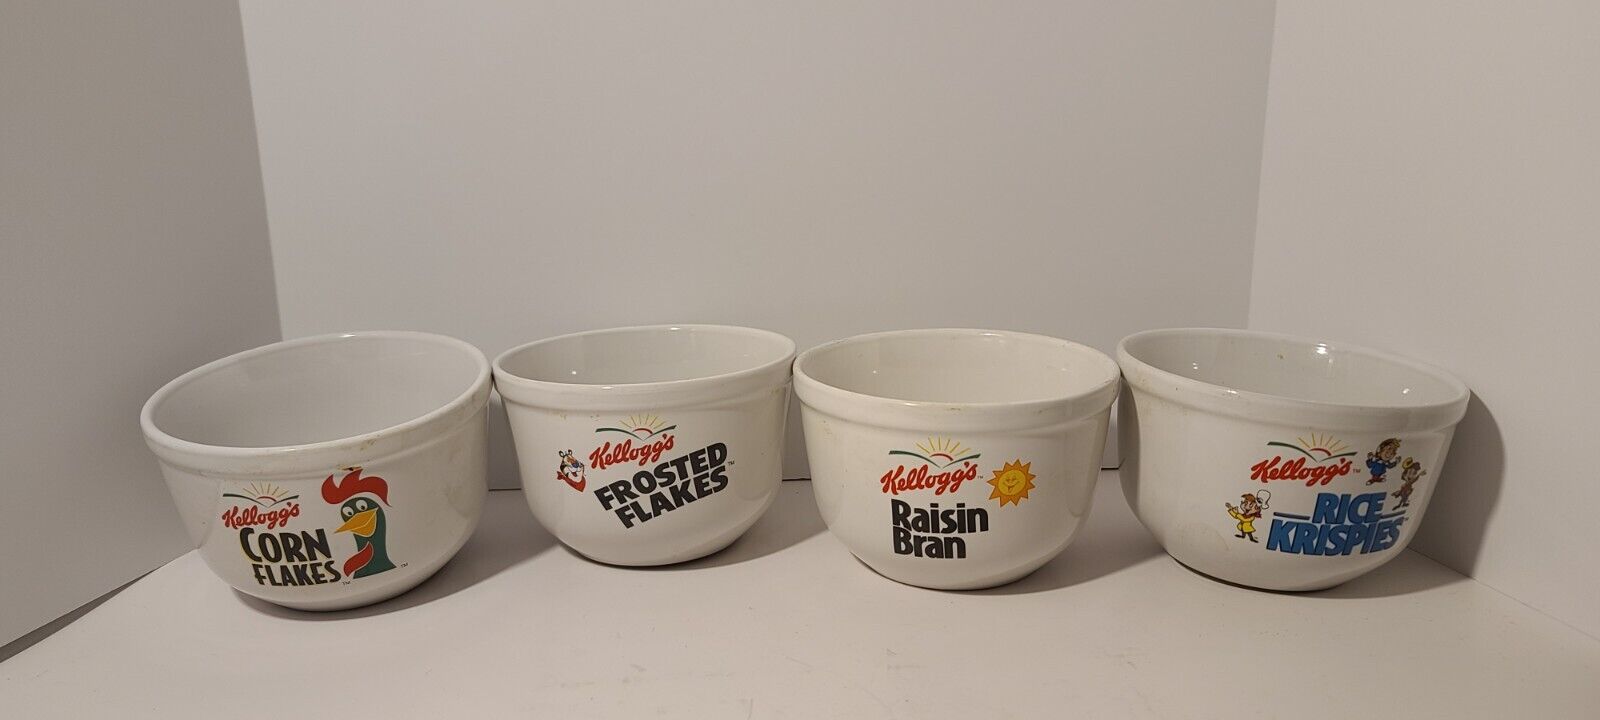 Set of 4~Vintage ~1999 Kelloggs Cereal Oatmeal Bowls~Corn Flakes~Frosted~Raisin~